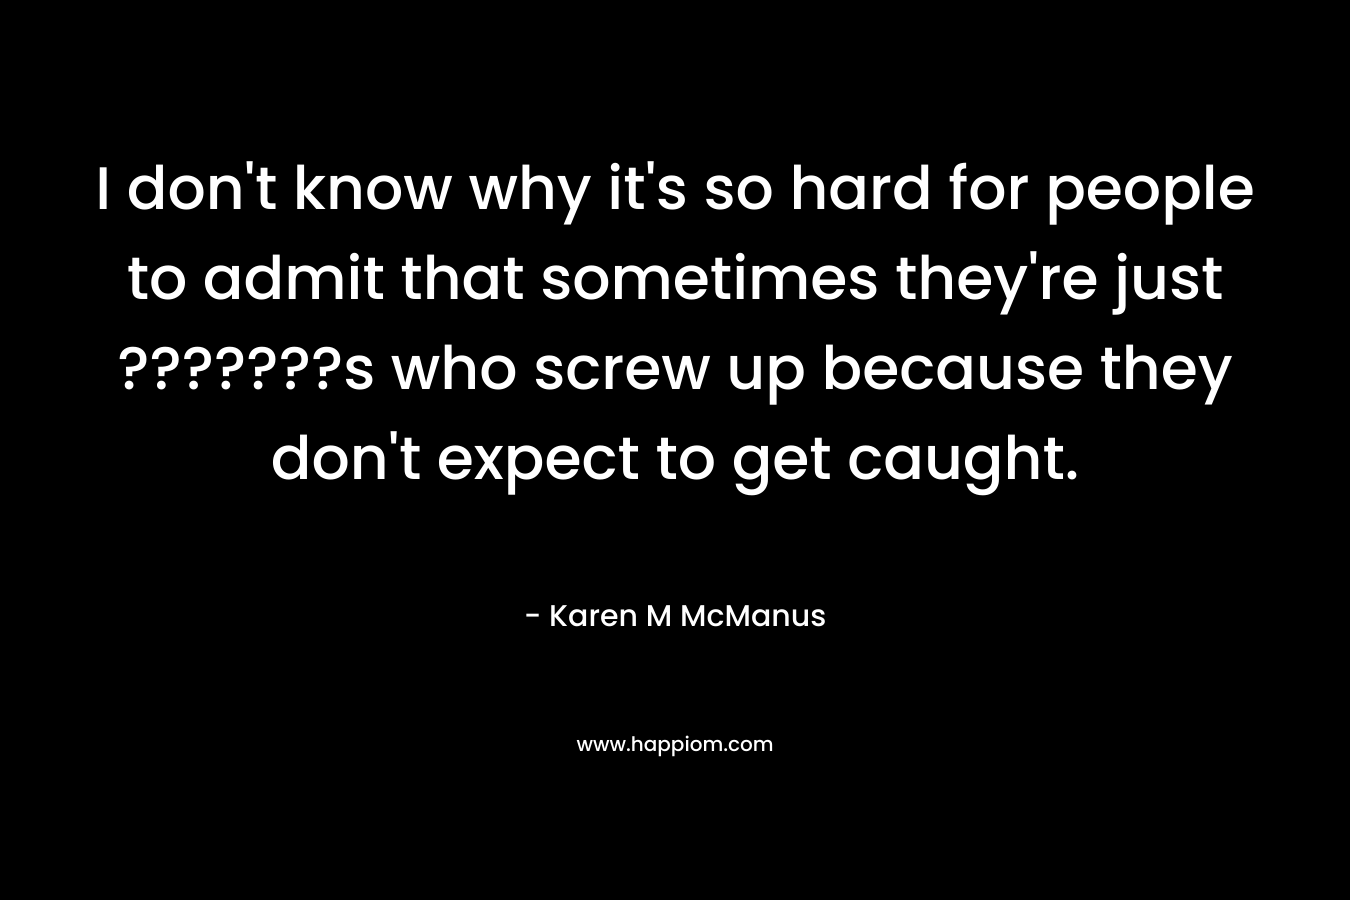 I don’t know why it’s so hard for people to admit that sometimes they’re just ???????s who screw up because they don’t expect to get caught. – Karen M McManus